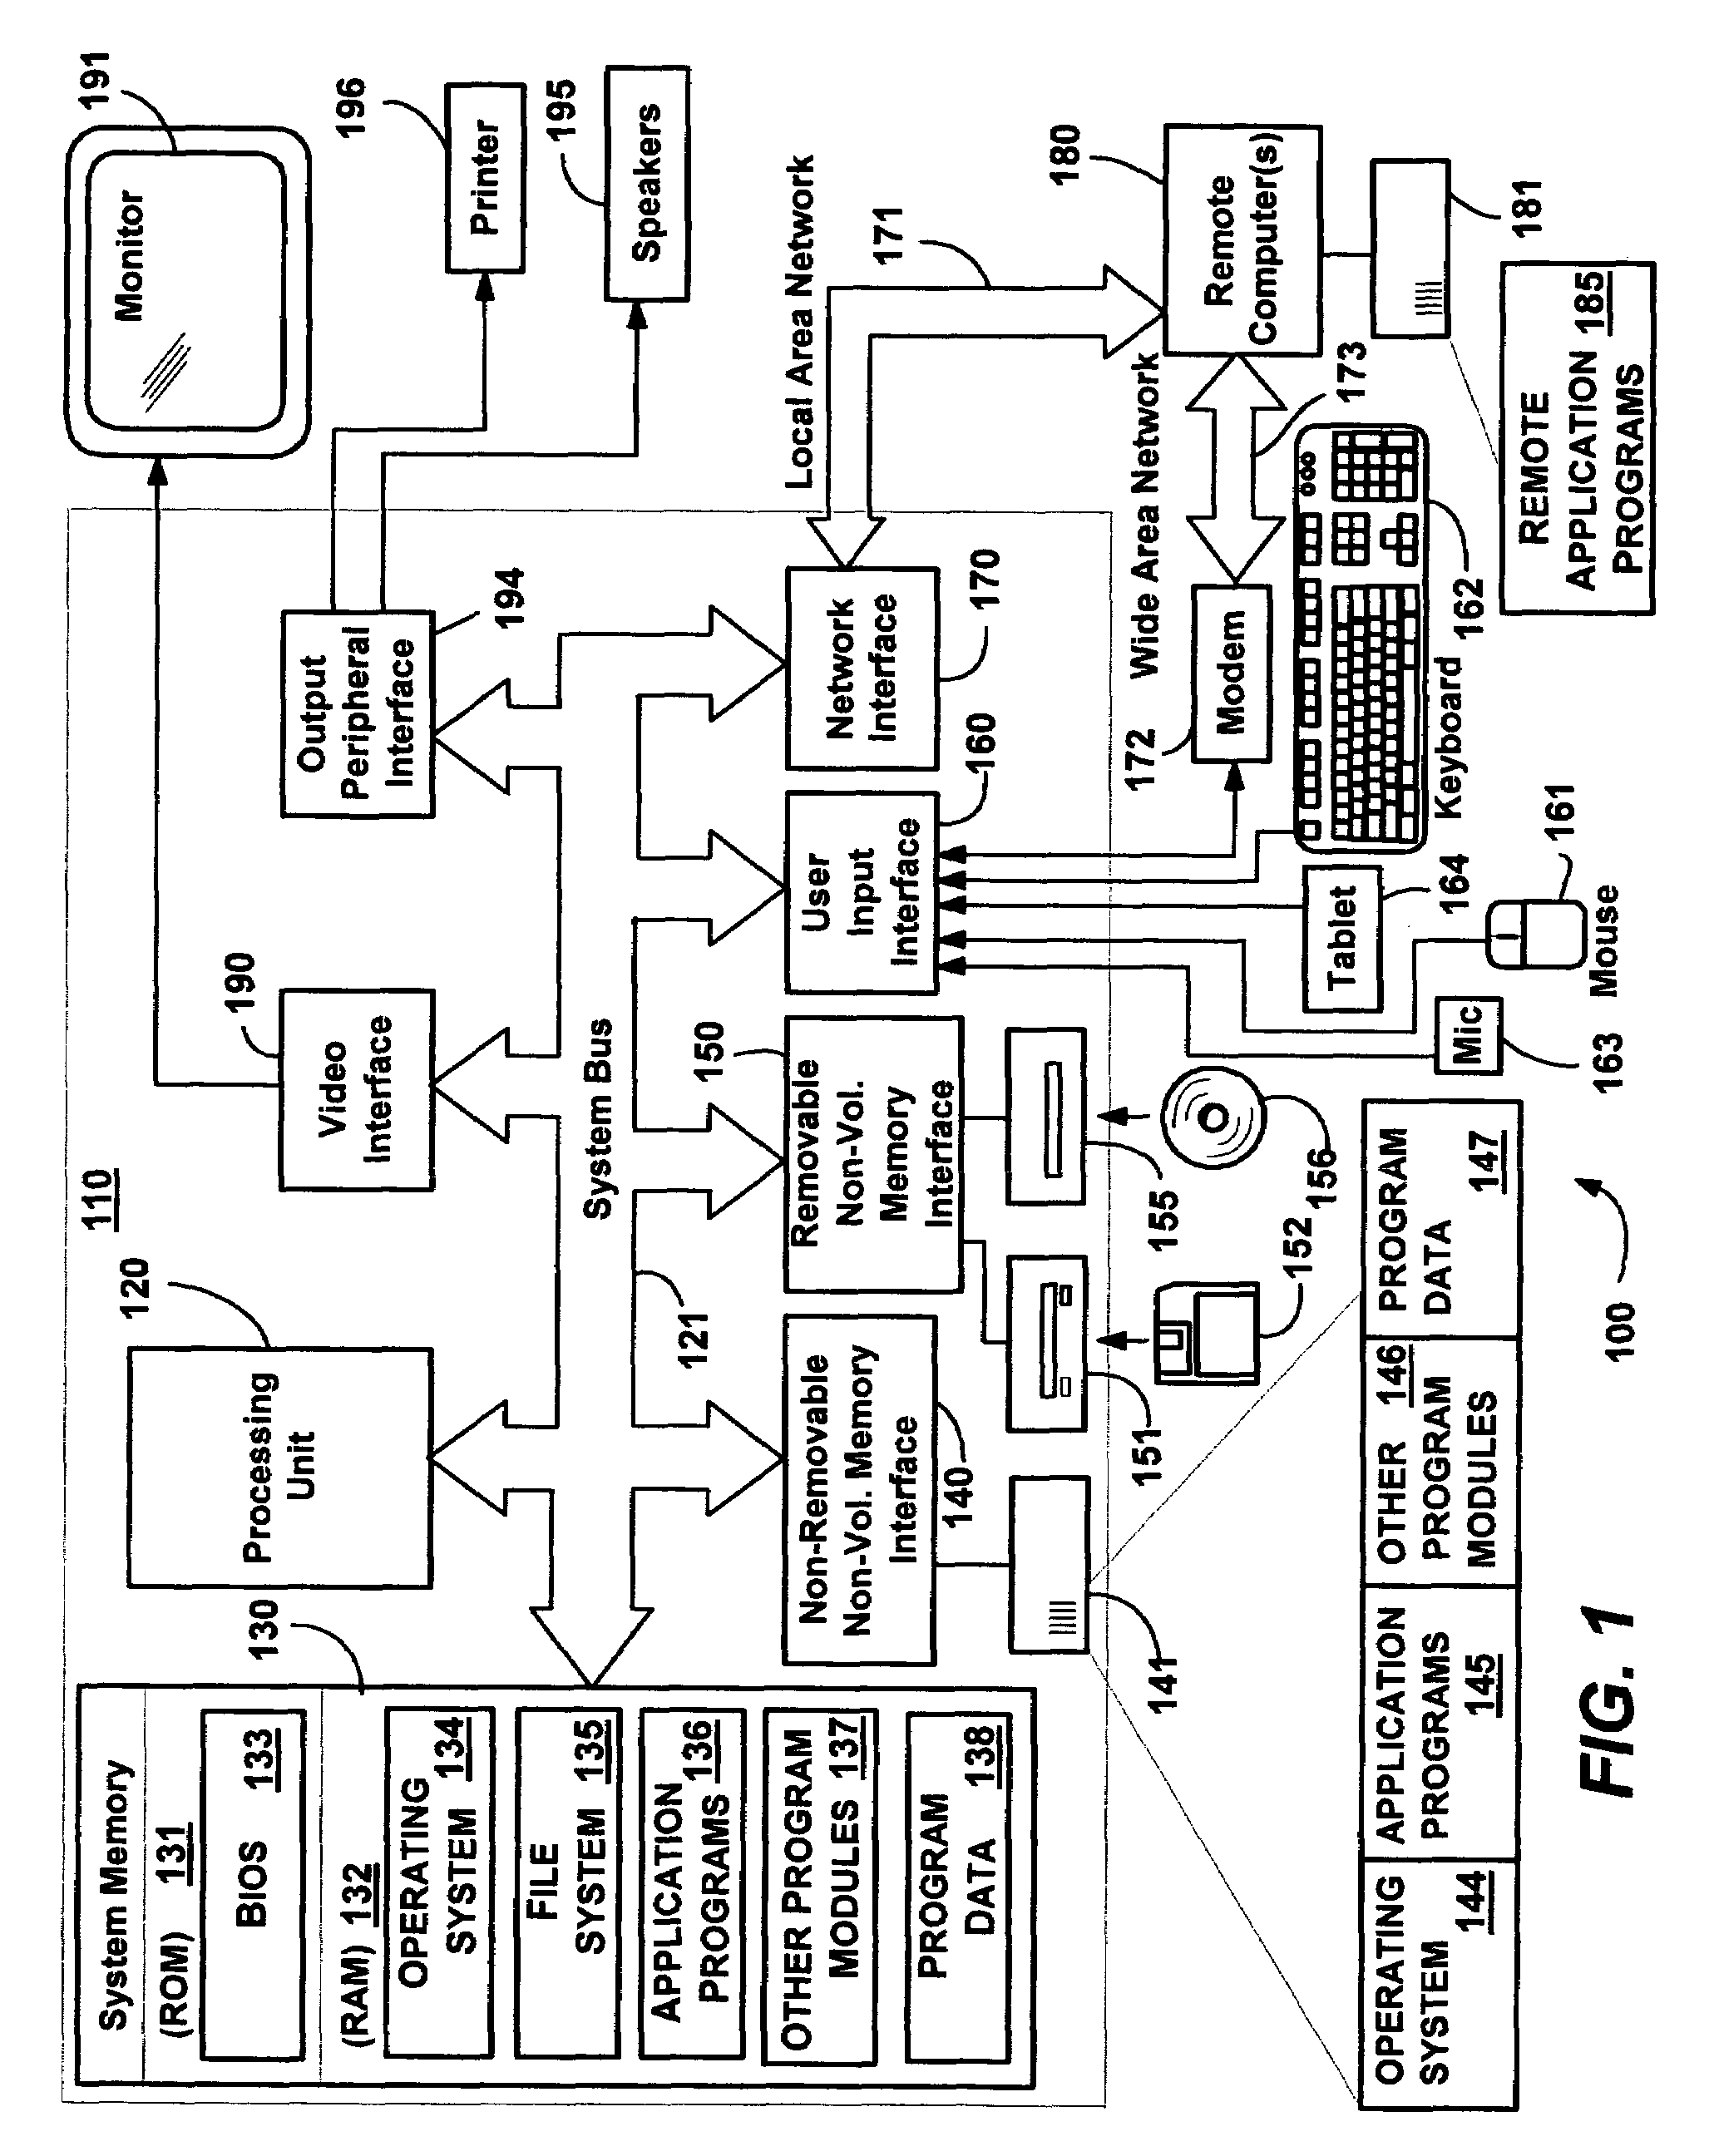 Multiple-level graphics processing with animation interval generation